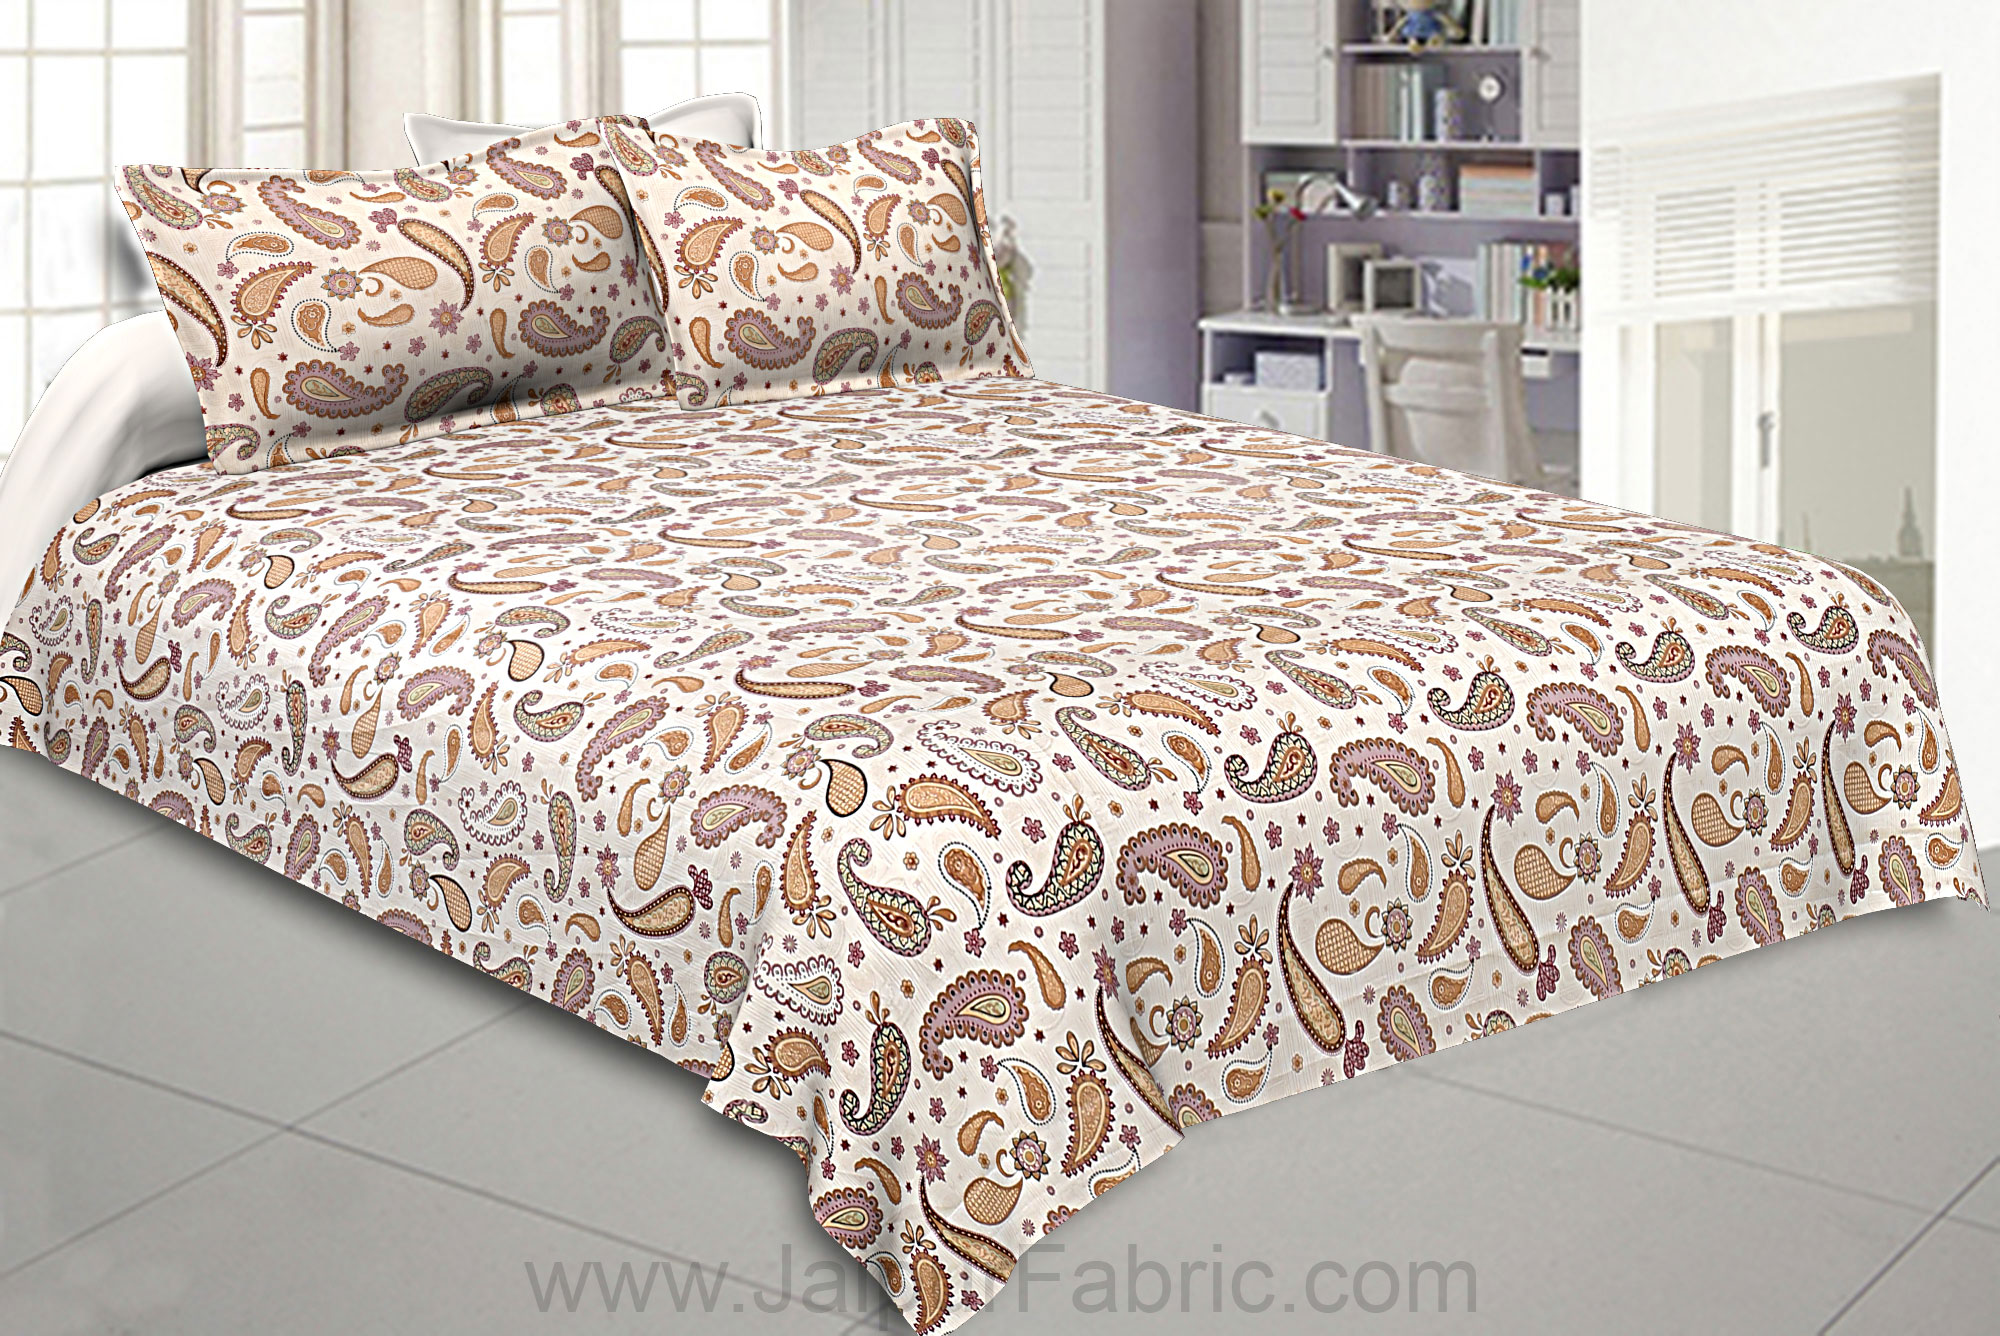 Bed in a Bag Paisley Creamish Pink Double BedSheet Comforter Combo